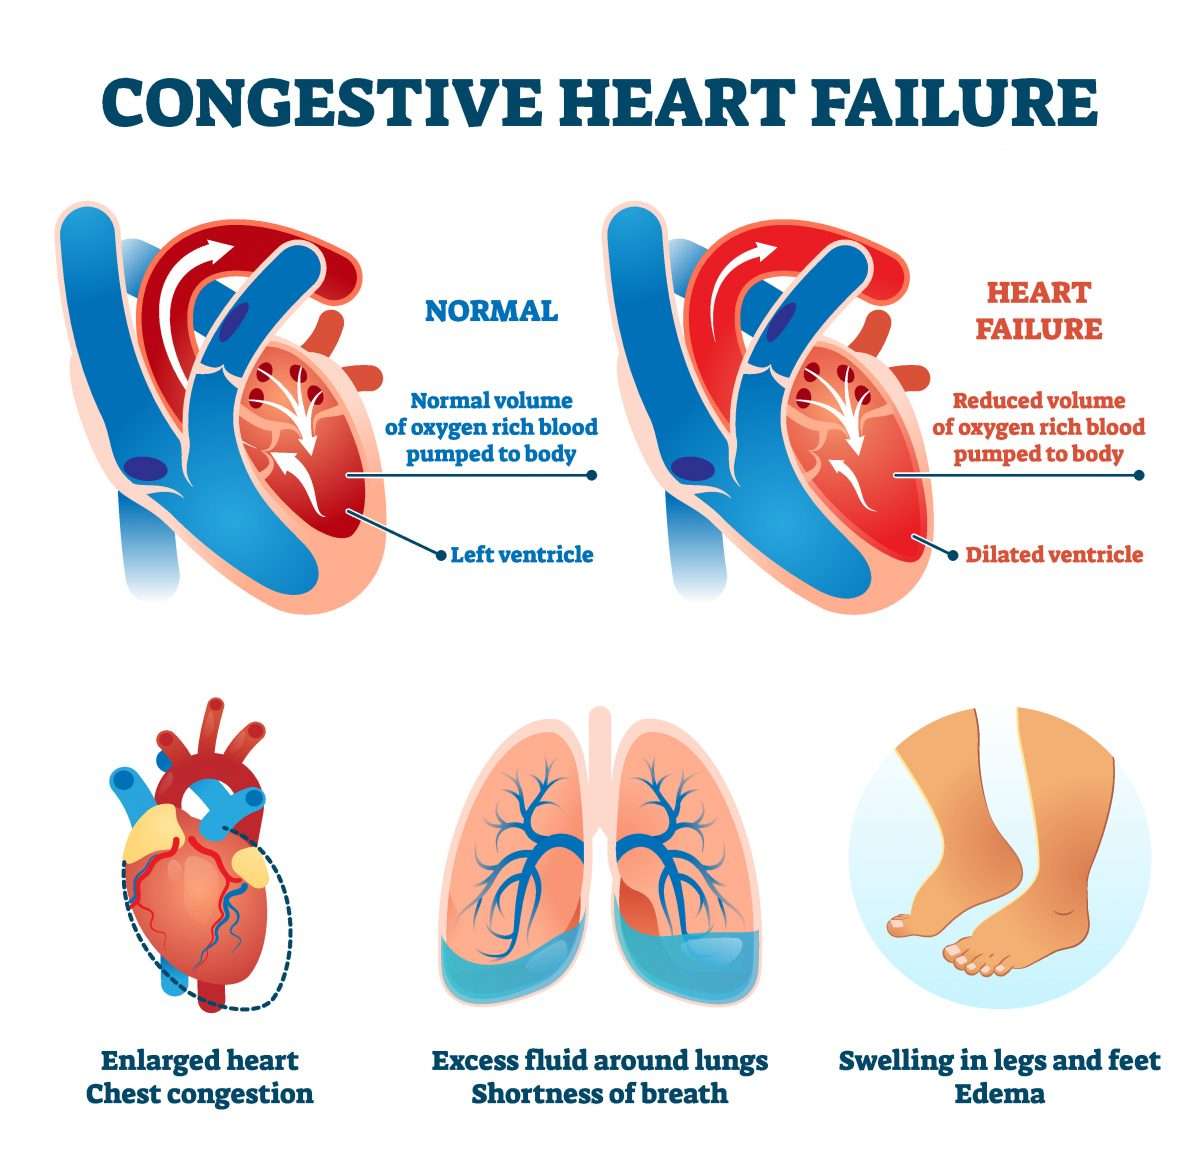 What Is Congested Heart Failure